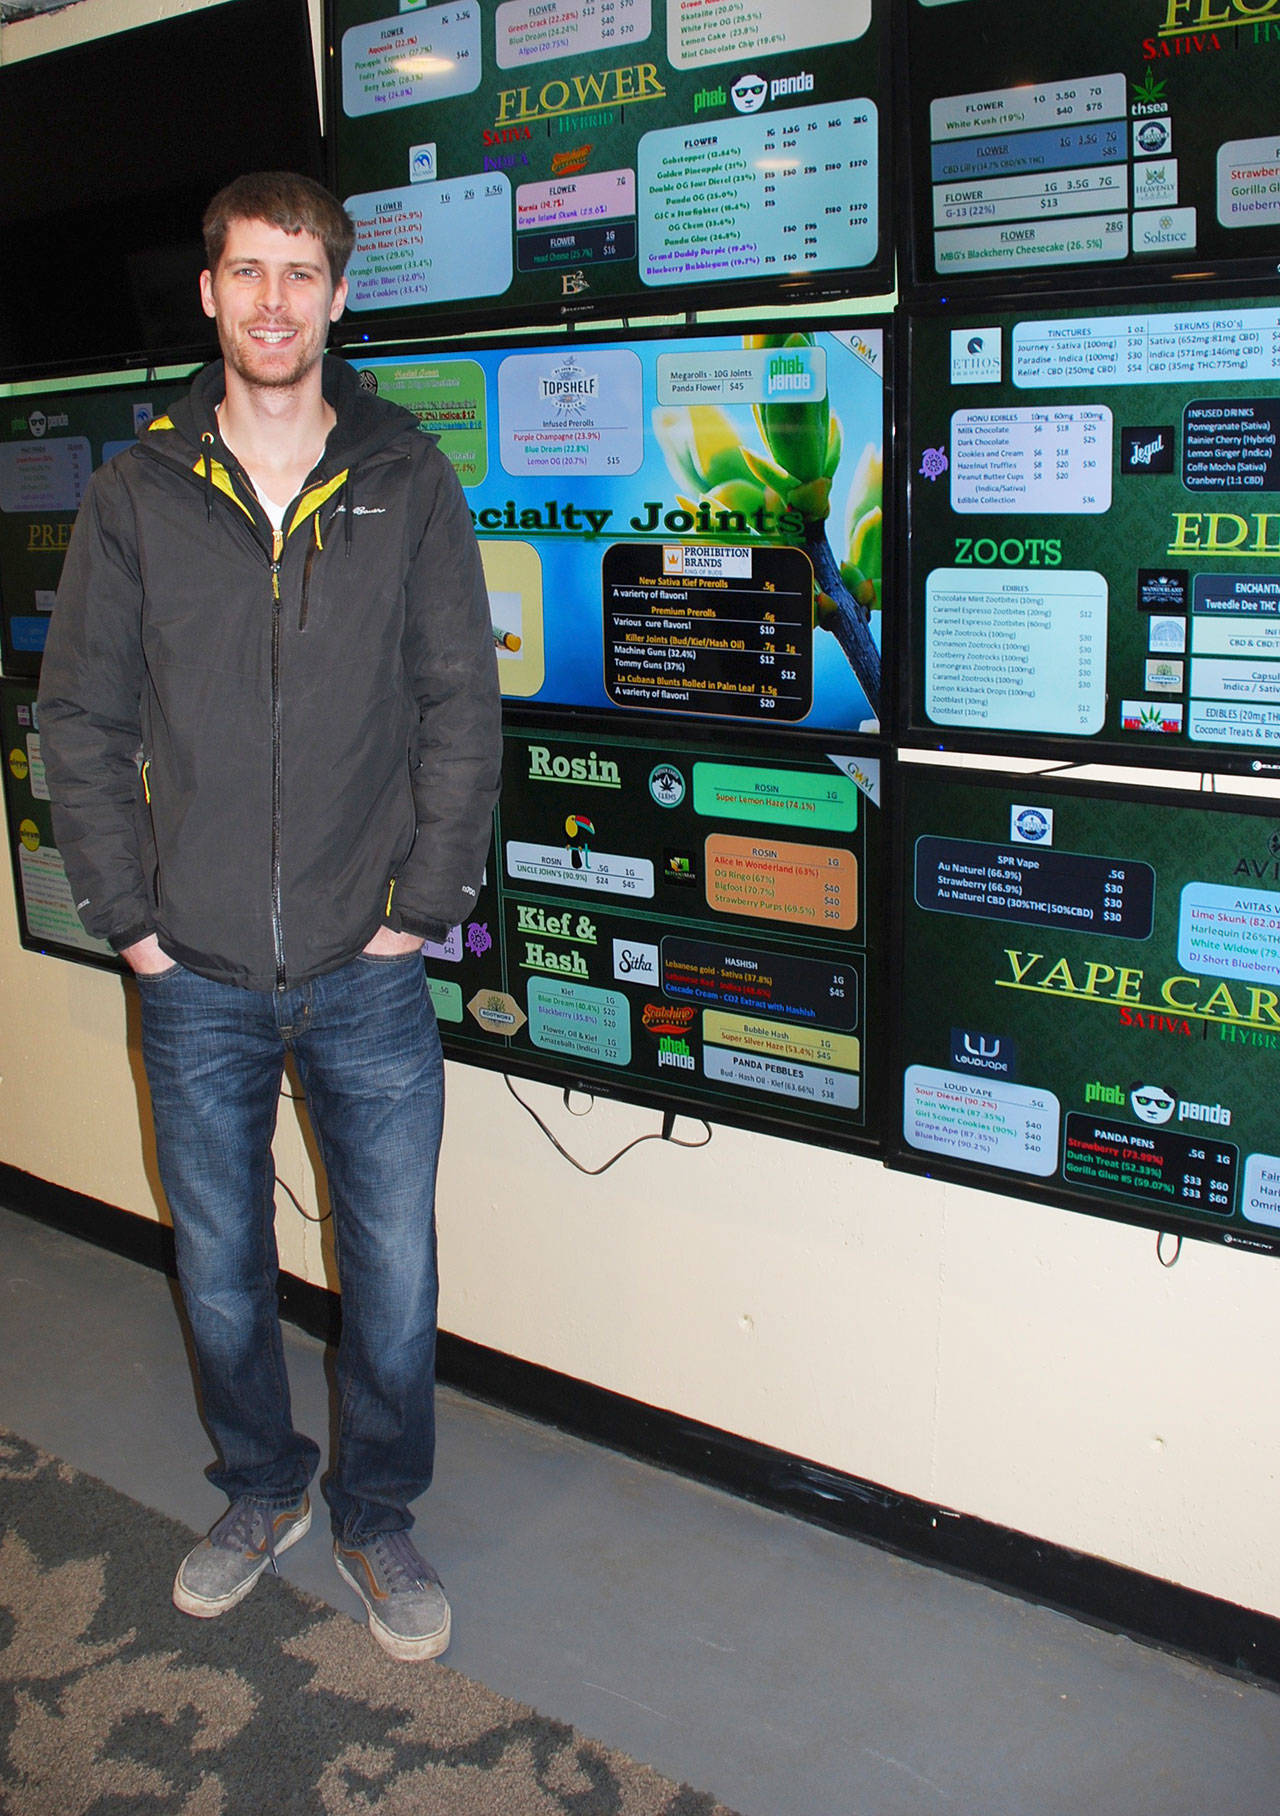 Michael Lyman, co-owner of GreenWay Marijuana in Port Orchard, found his business venture to be a dream that’s been realized. Photo credit: Bob Smith | Kitsap Daily News